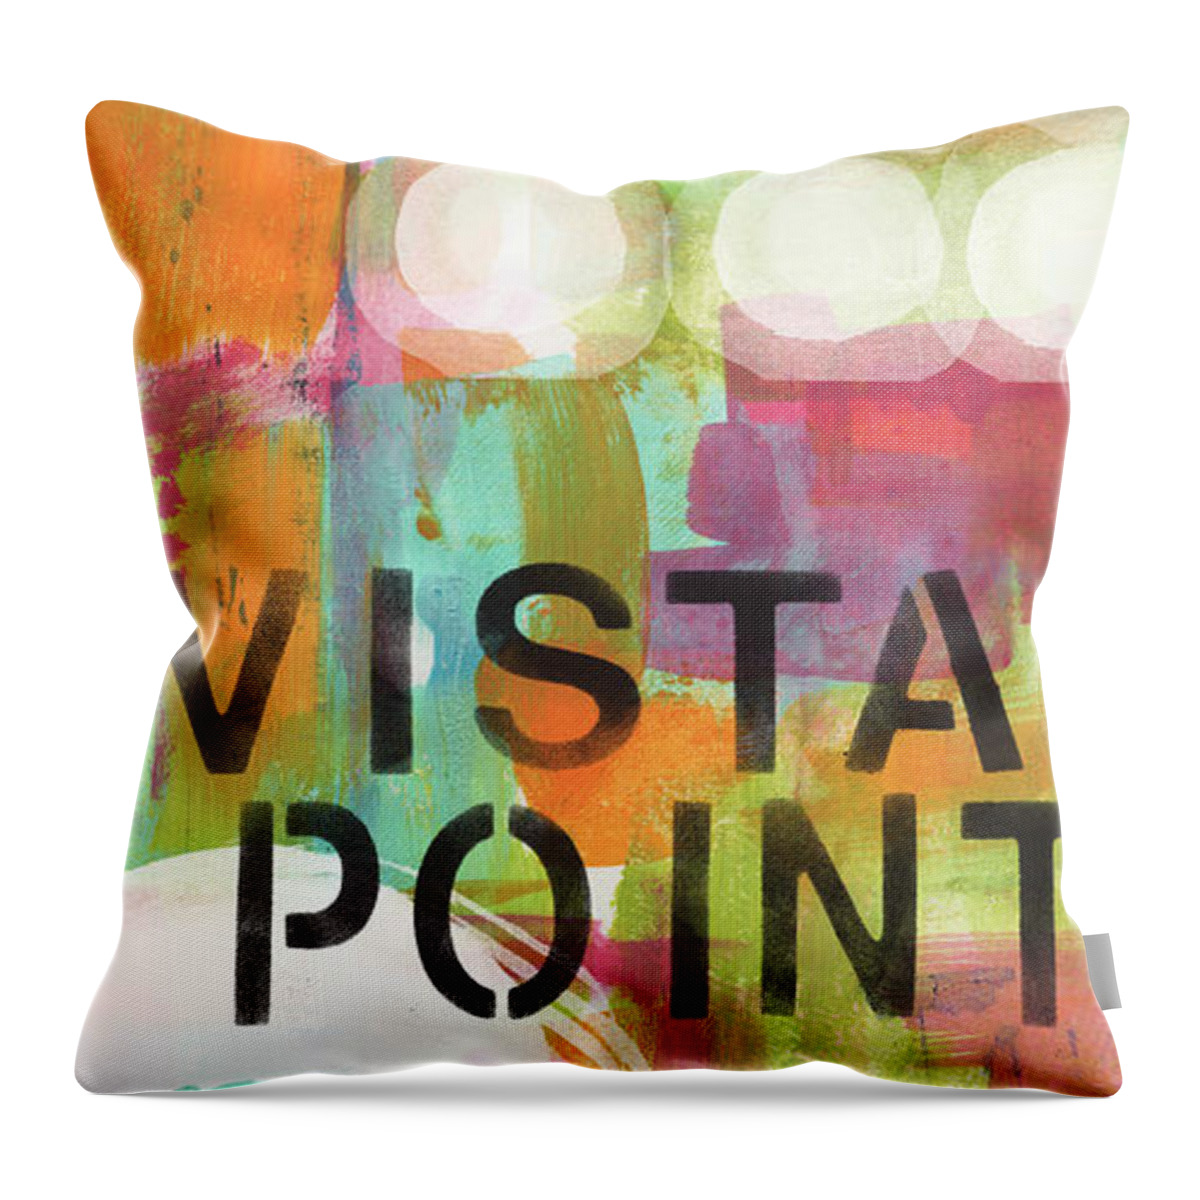 Abstract Painting Throw Pillow featuring the painting Vista Point- contemporary abstract art by Linda Woods